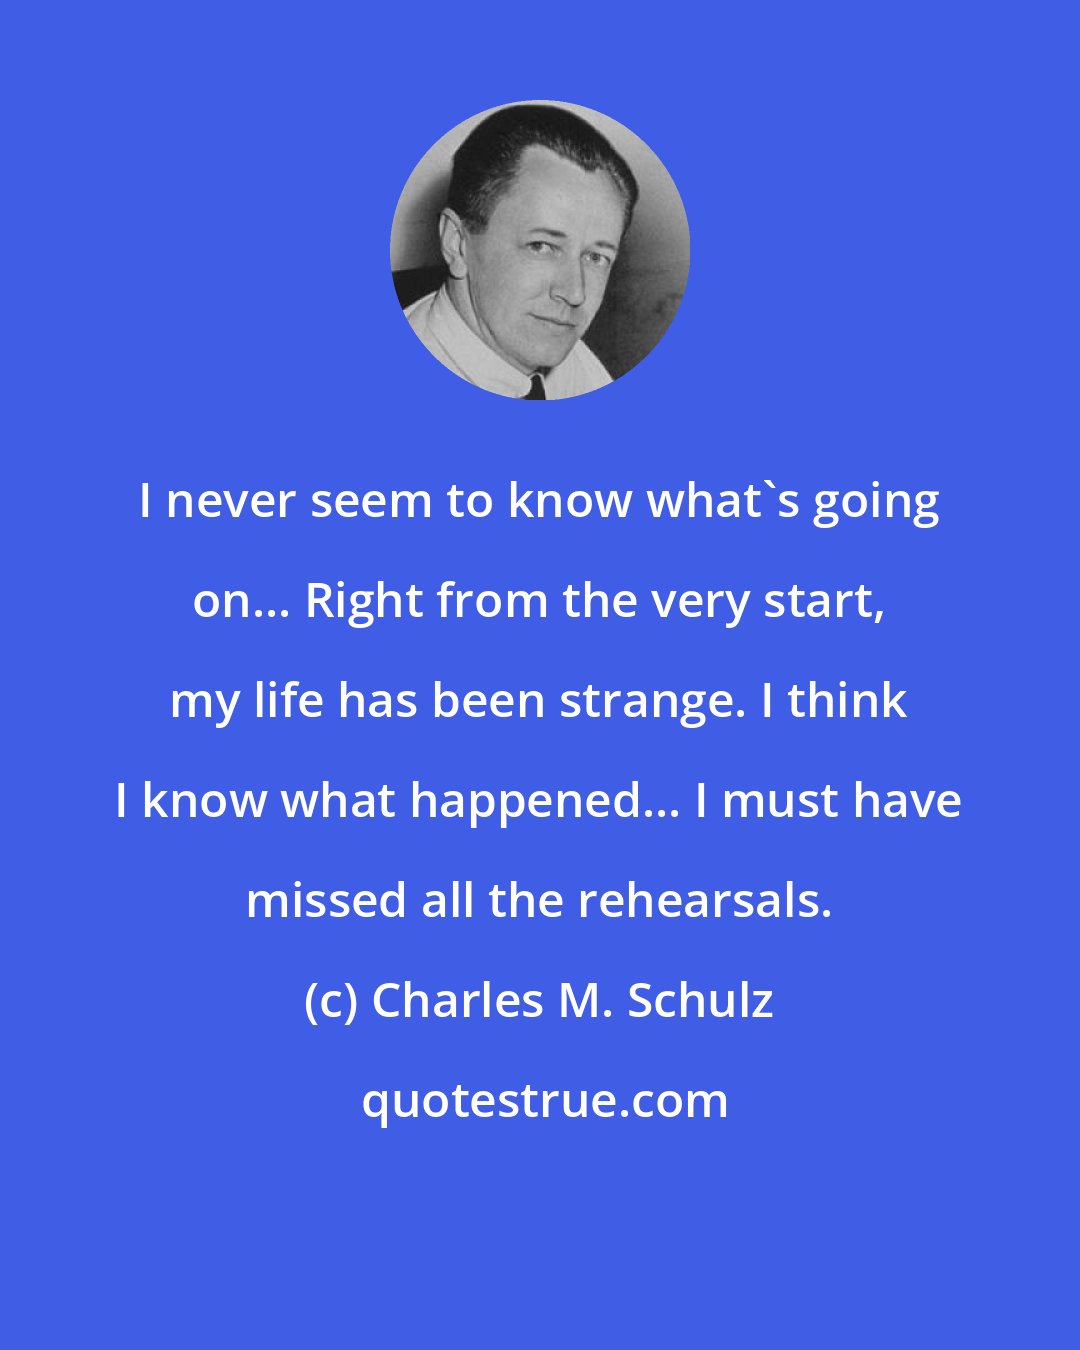 Charles M. Schulz: I never seem to know what's going on... Right from the very start, my life has been strange. I think I know what happened... I must have missed all the rehearsals.